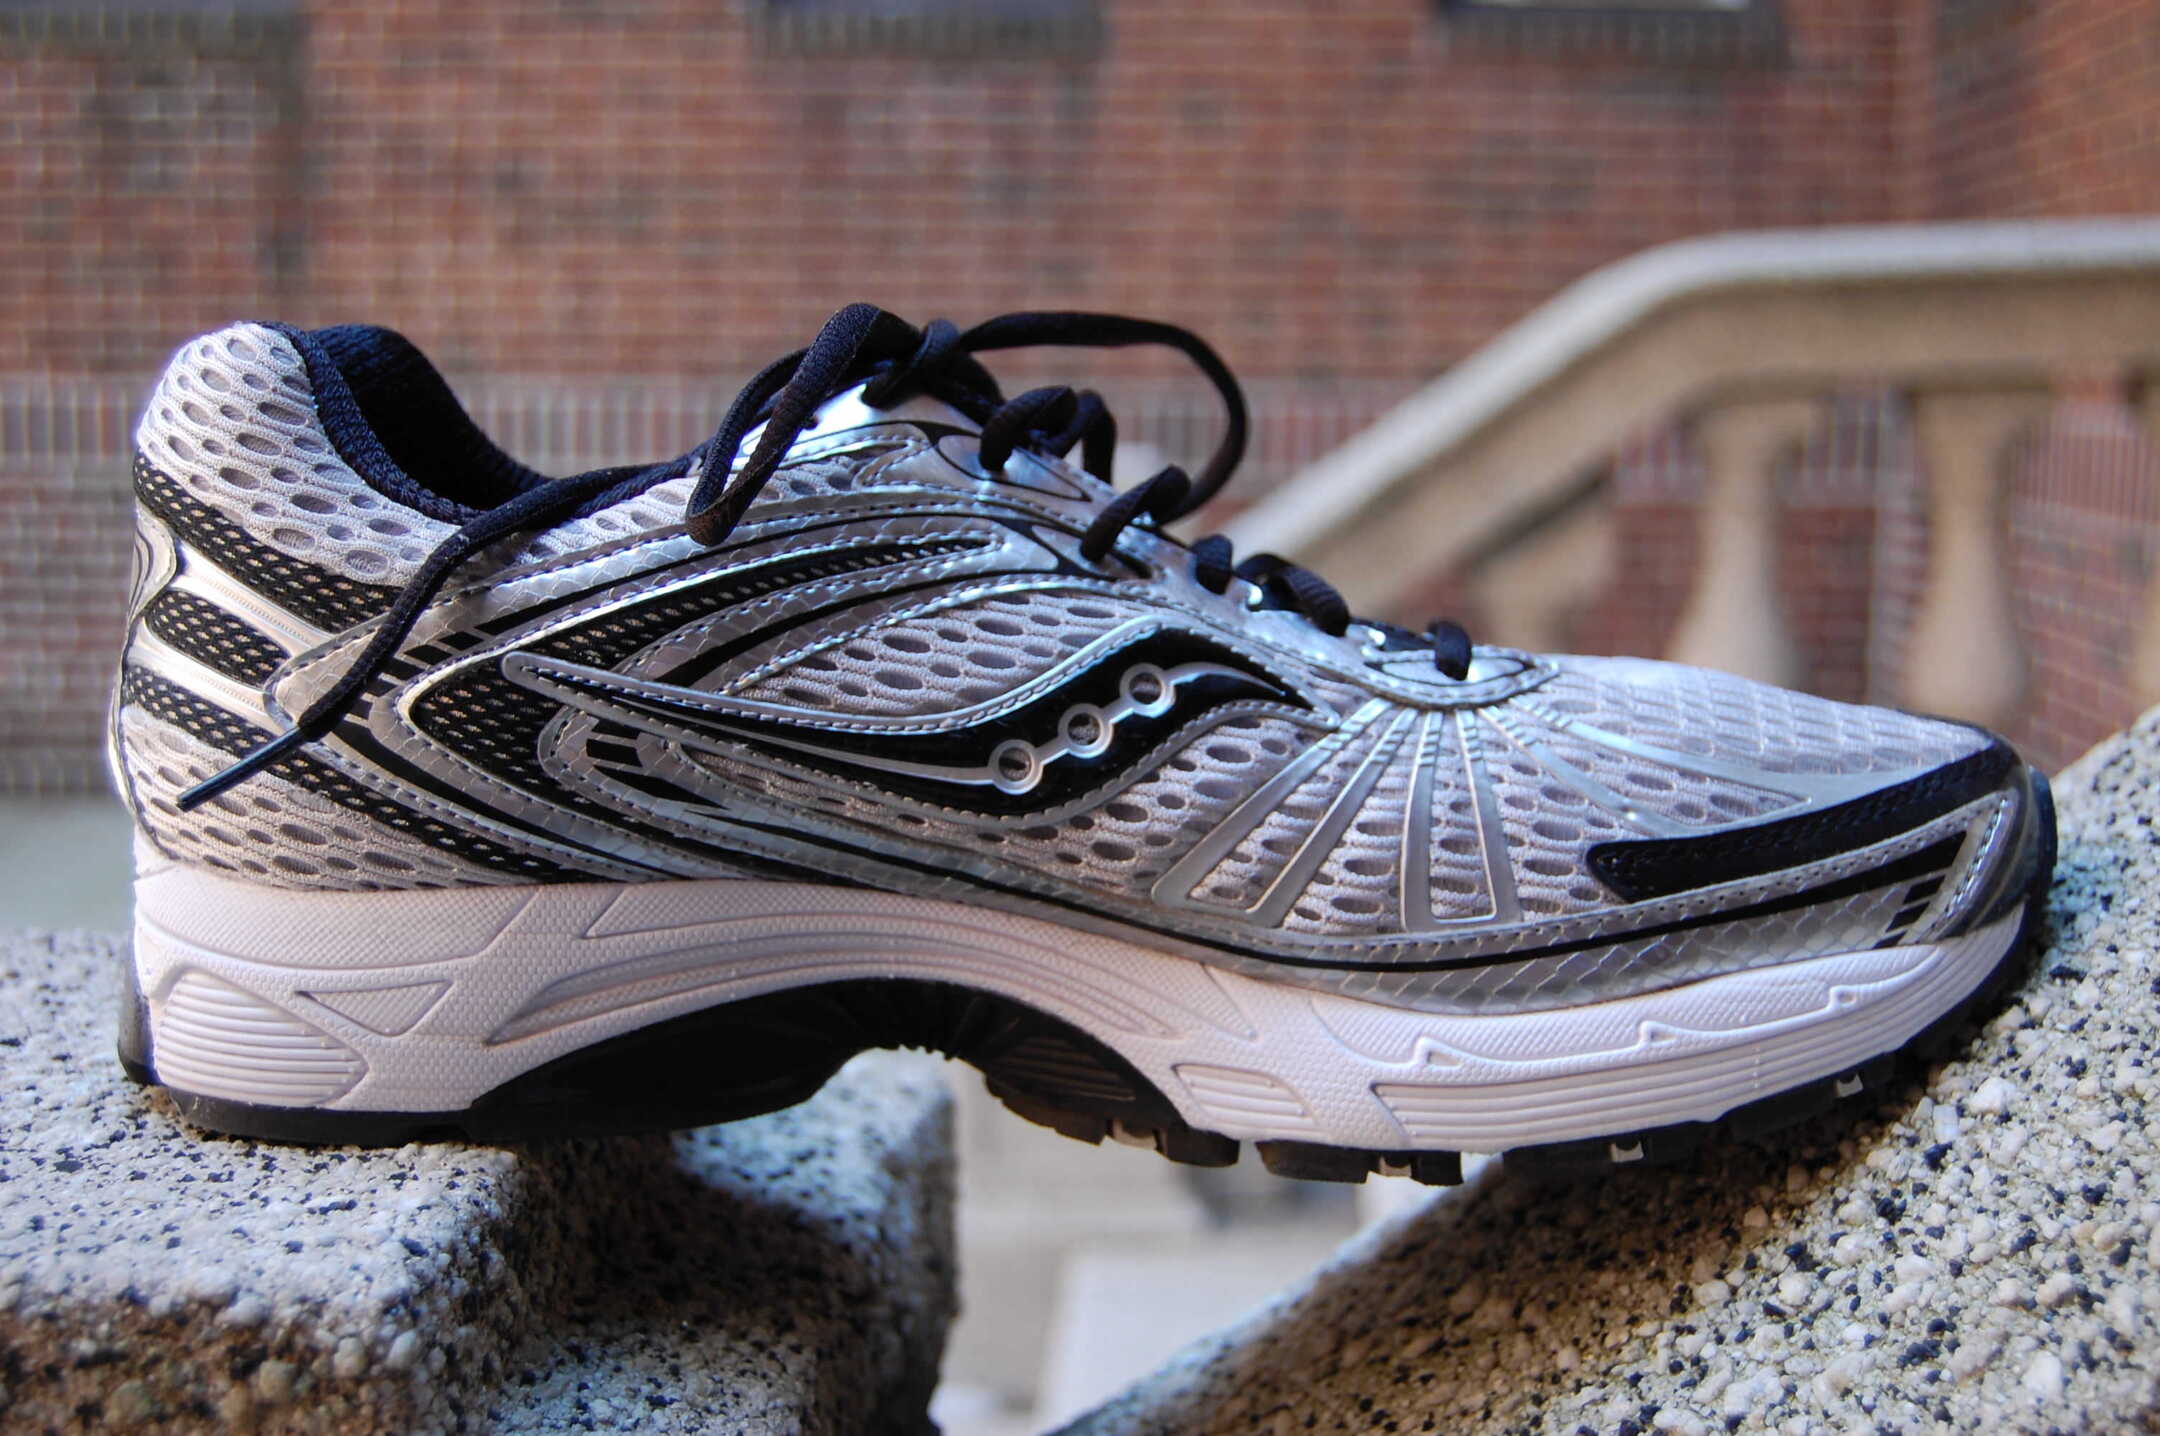 Review: Saucony Progrid Ride 4 Mens - The Ultimate Running Shoes For Men